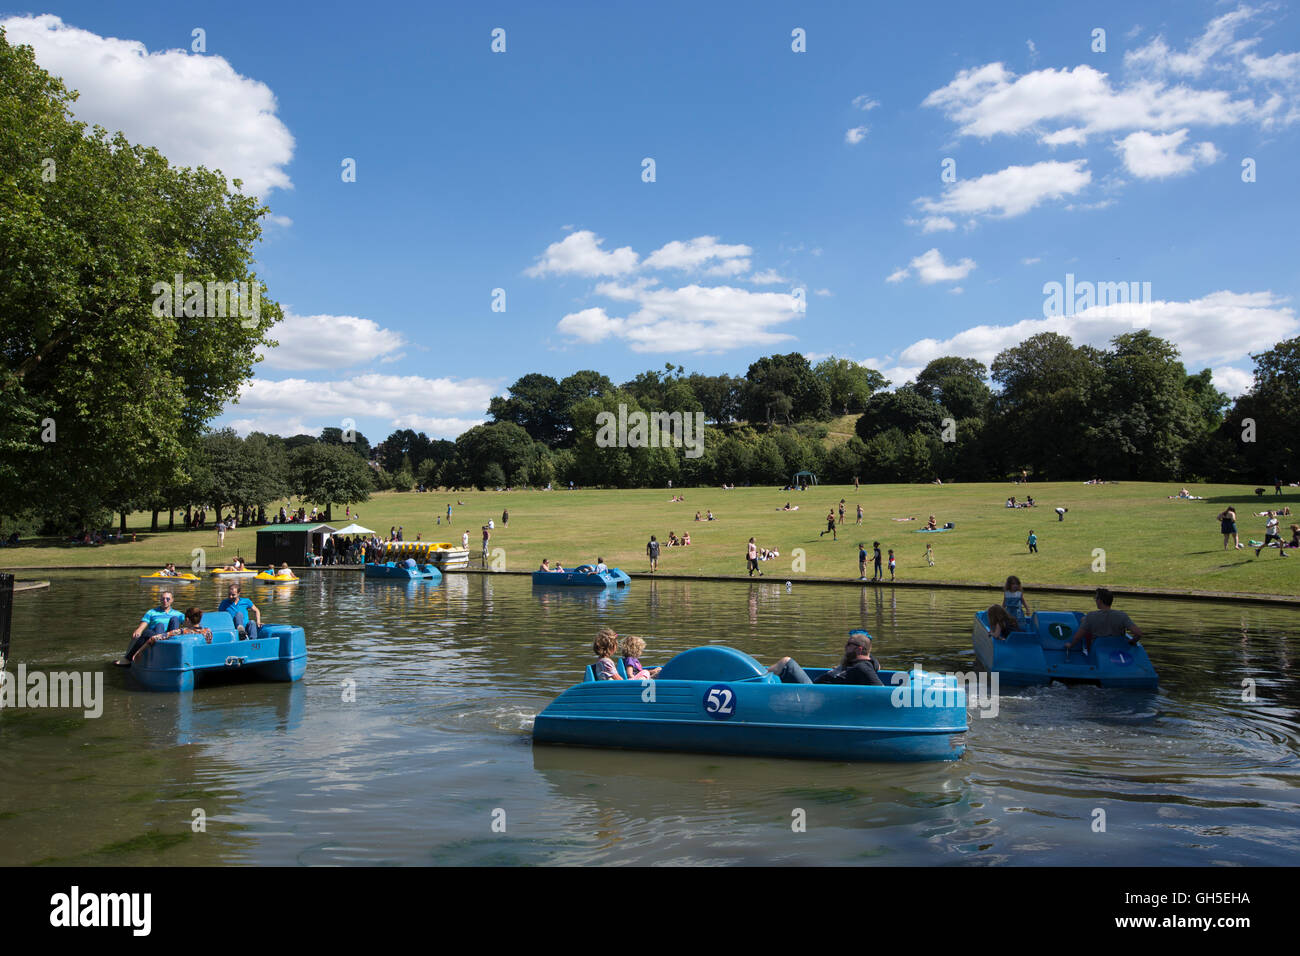 People enjoying the summer warm weather in Greenwich Park, south-east London, England, UK Stock Photo